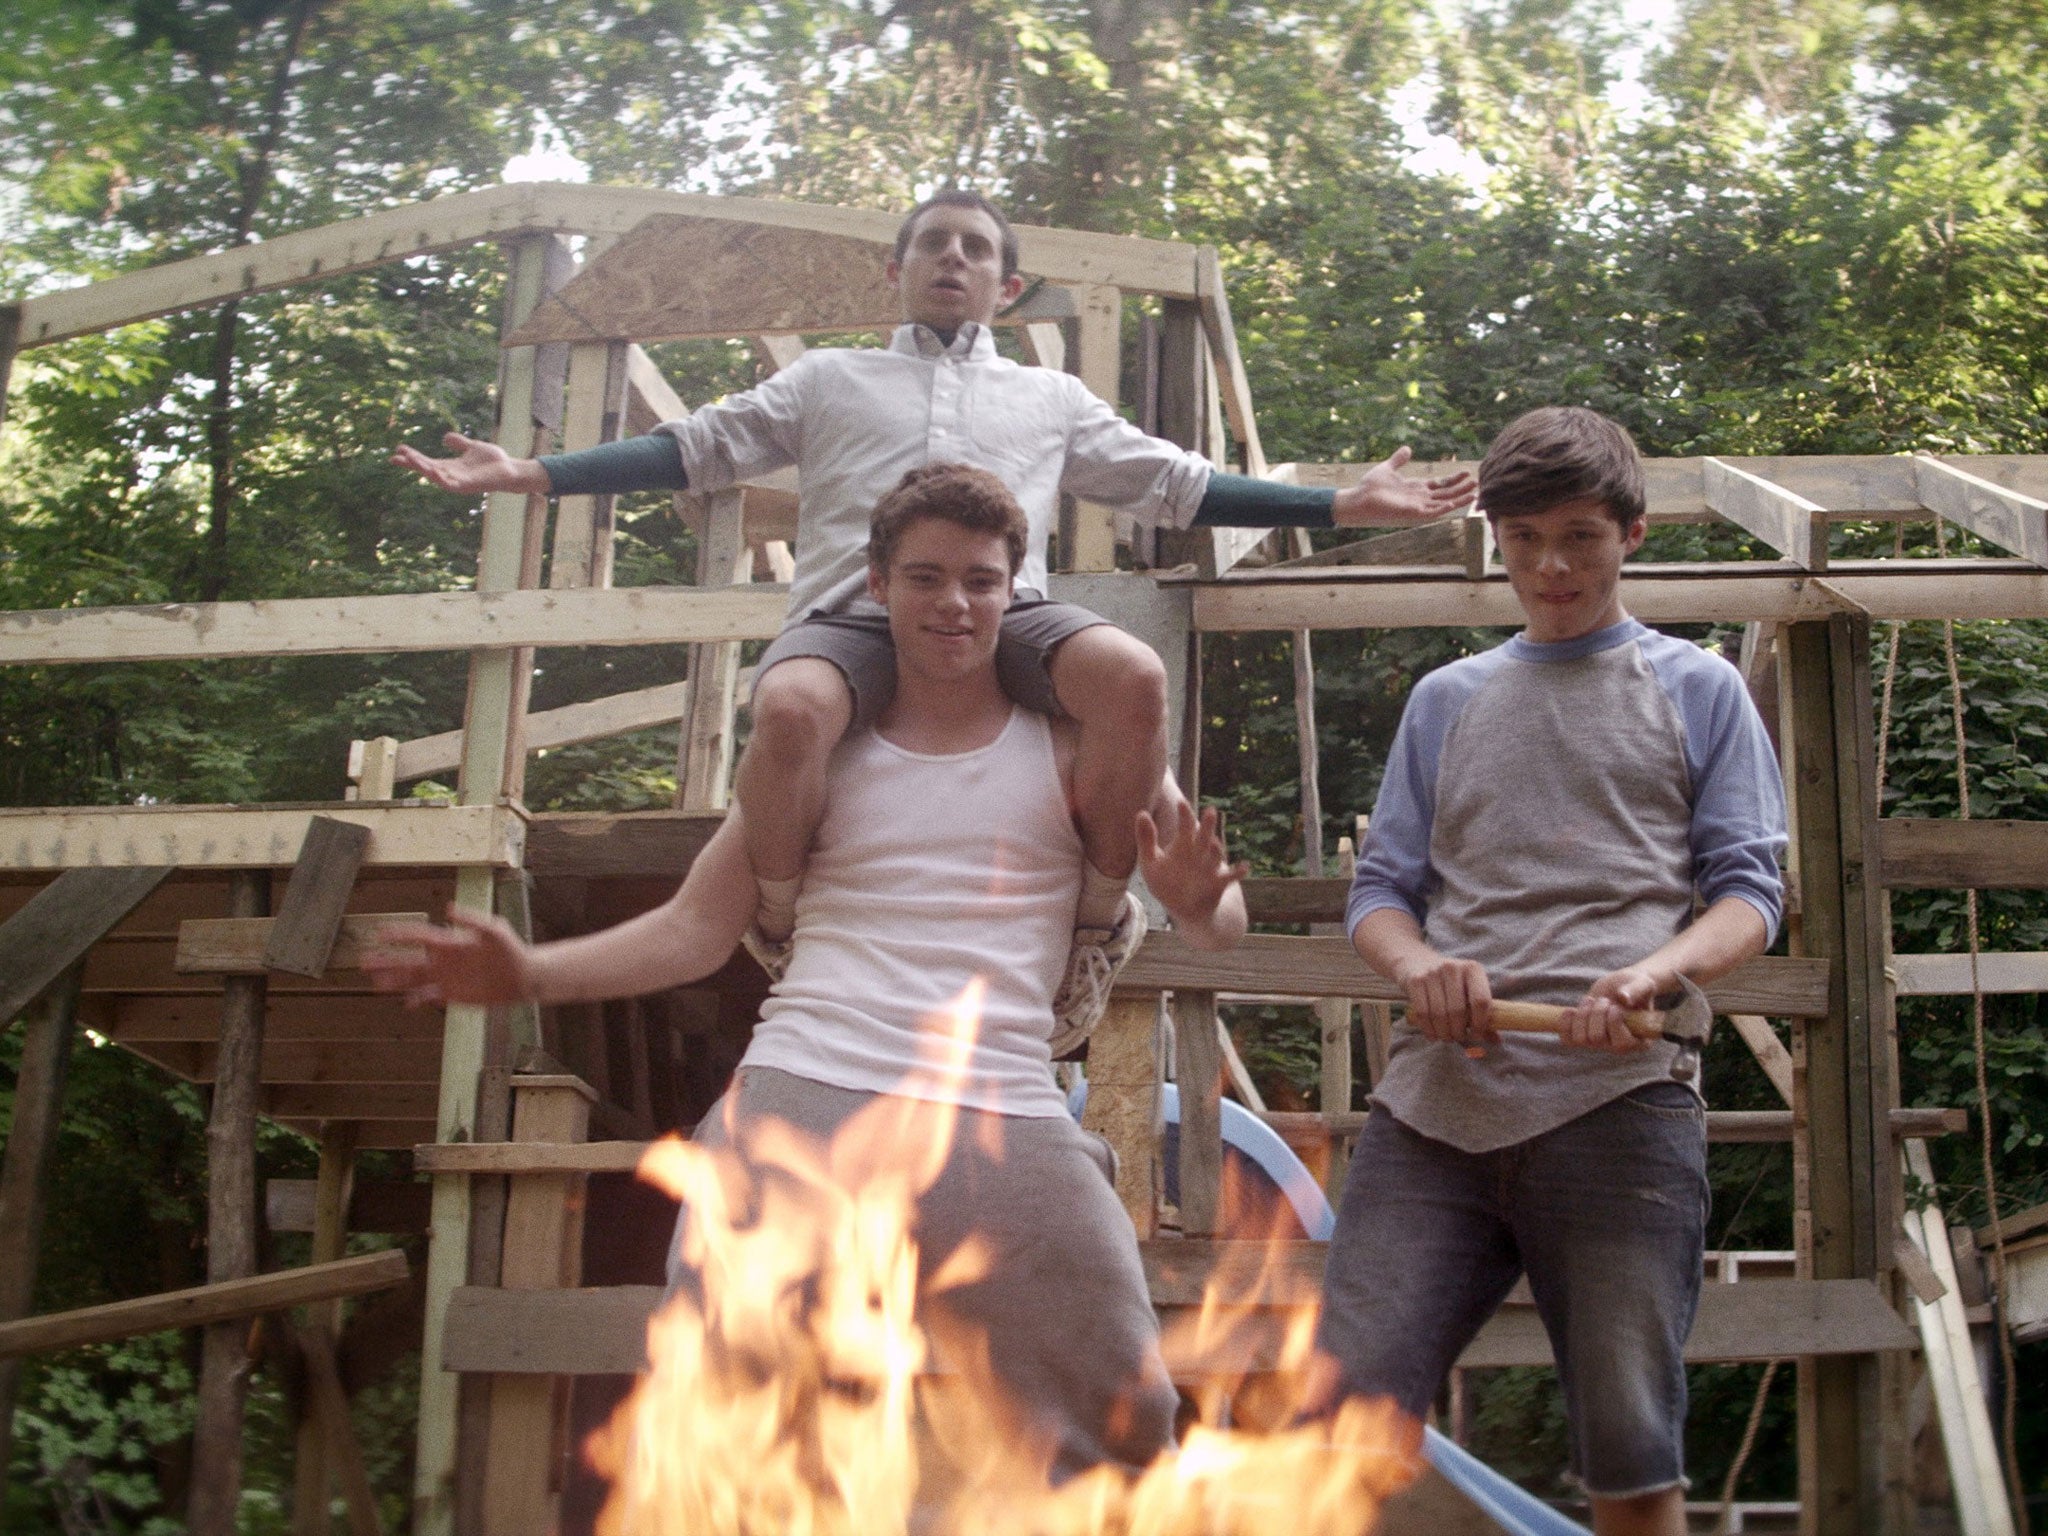 2013 The Kings Of Summer